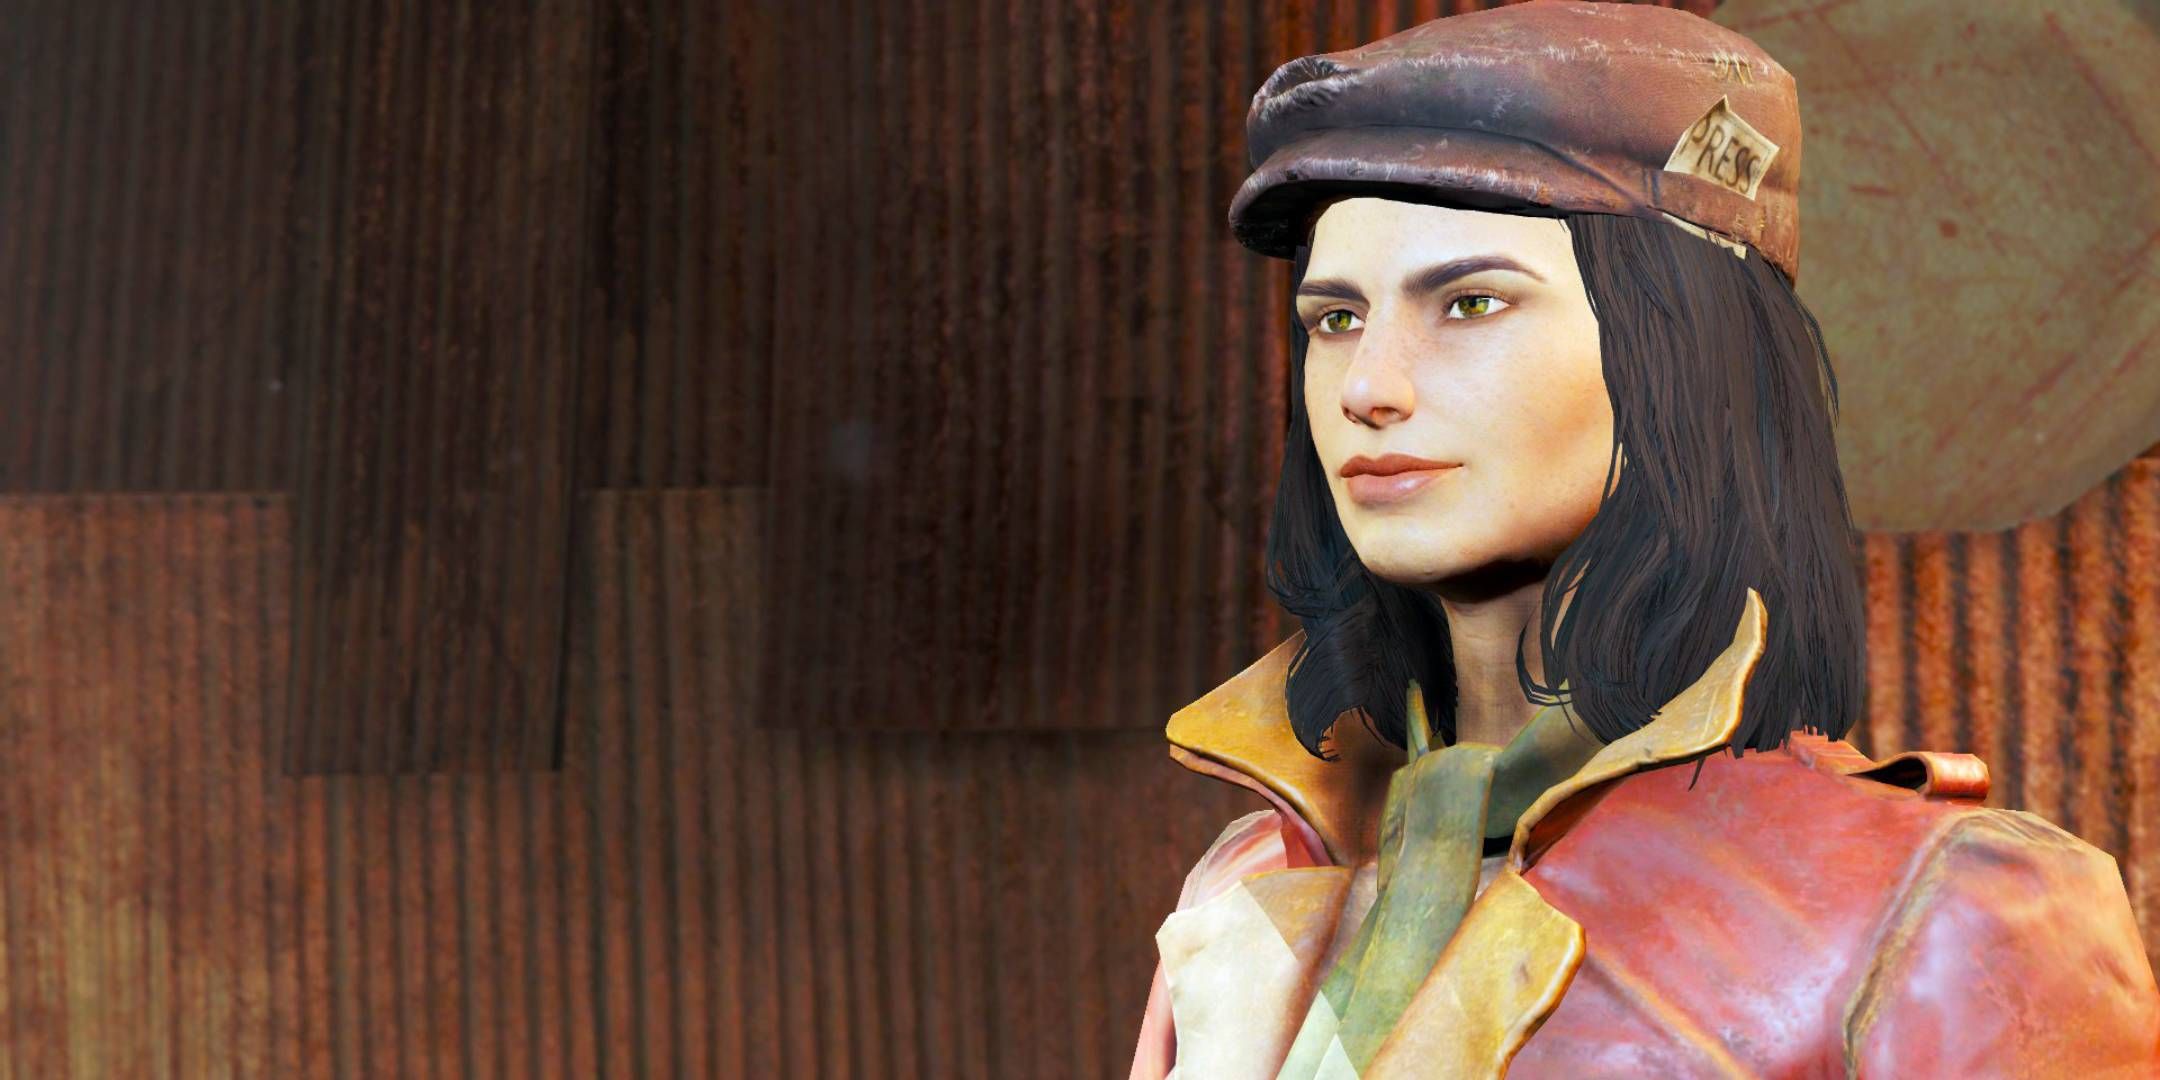 Piper from Fallout 4 with a subtle smirk